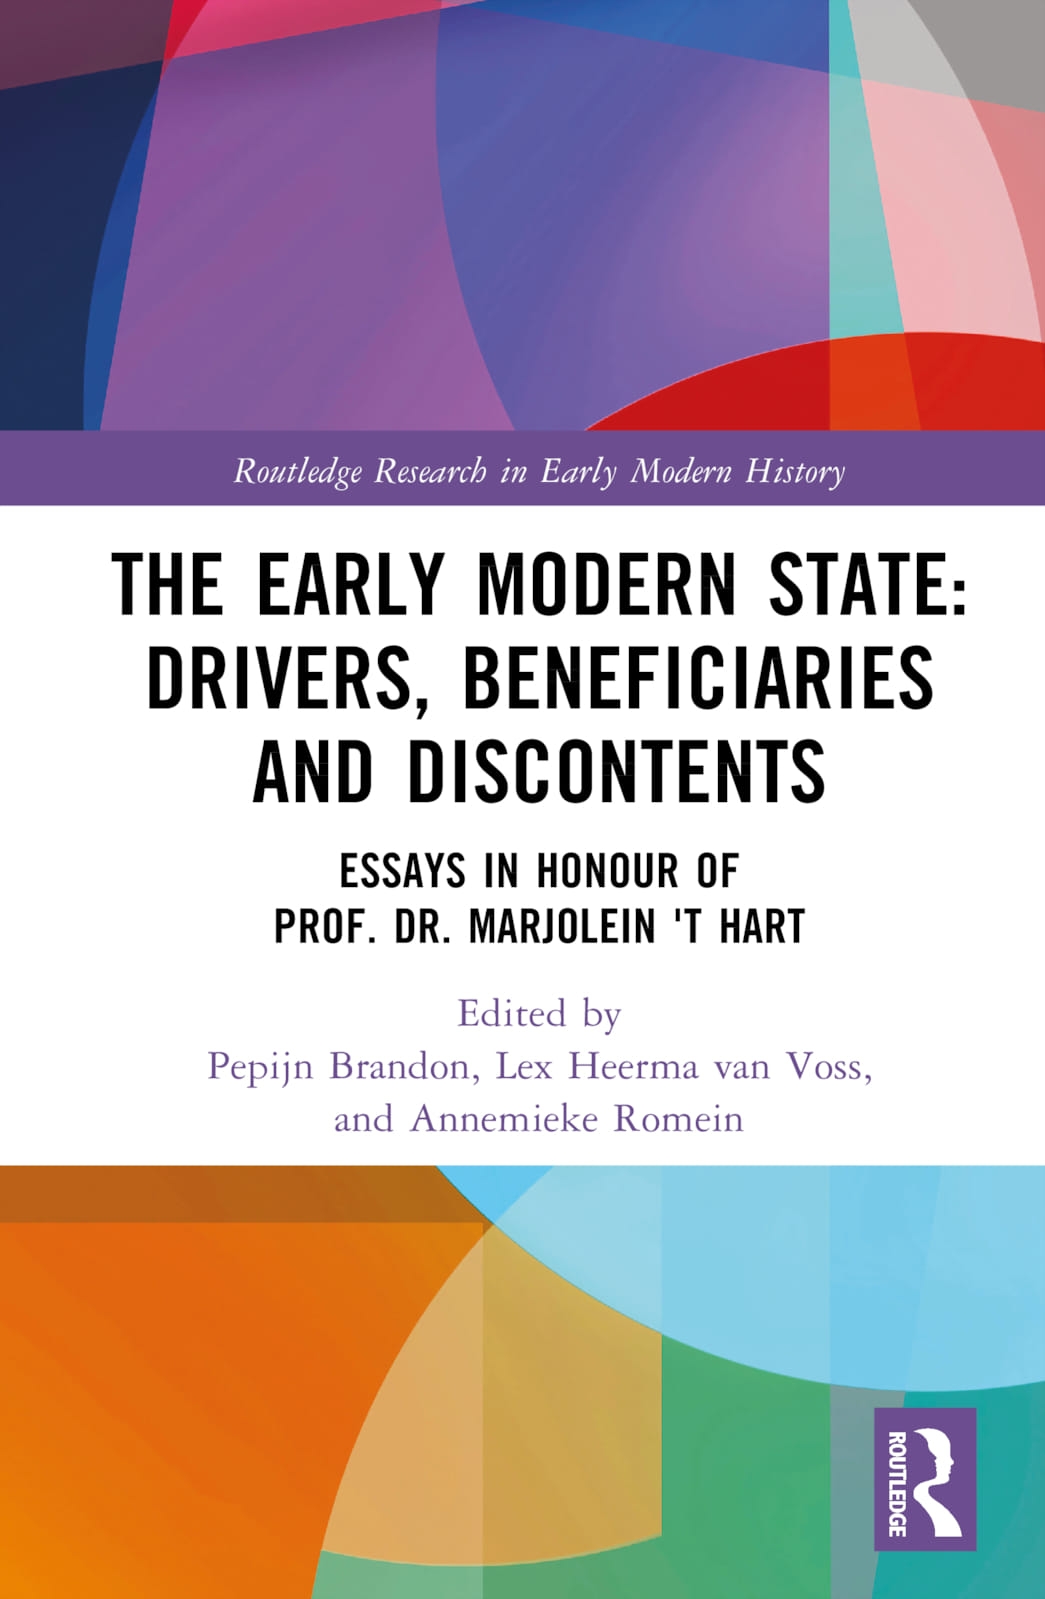 The Early Modern State: Drivers, Beneficiaries and Discontents: Essays in Honour of Prof. Dr. Marjolein ’’t Hart